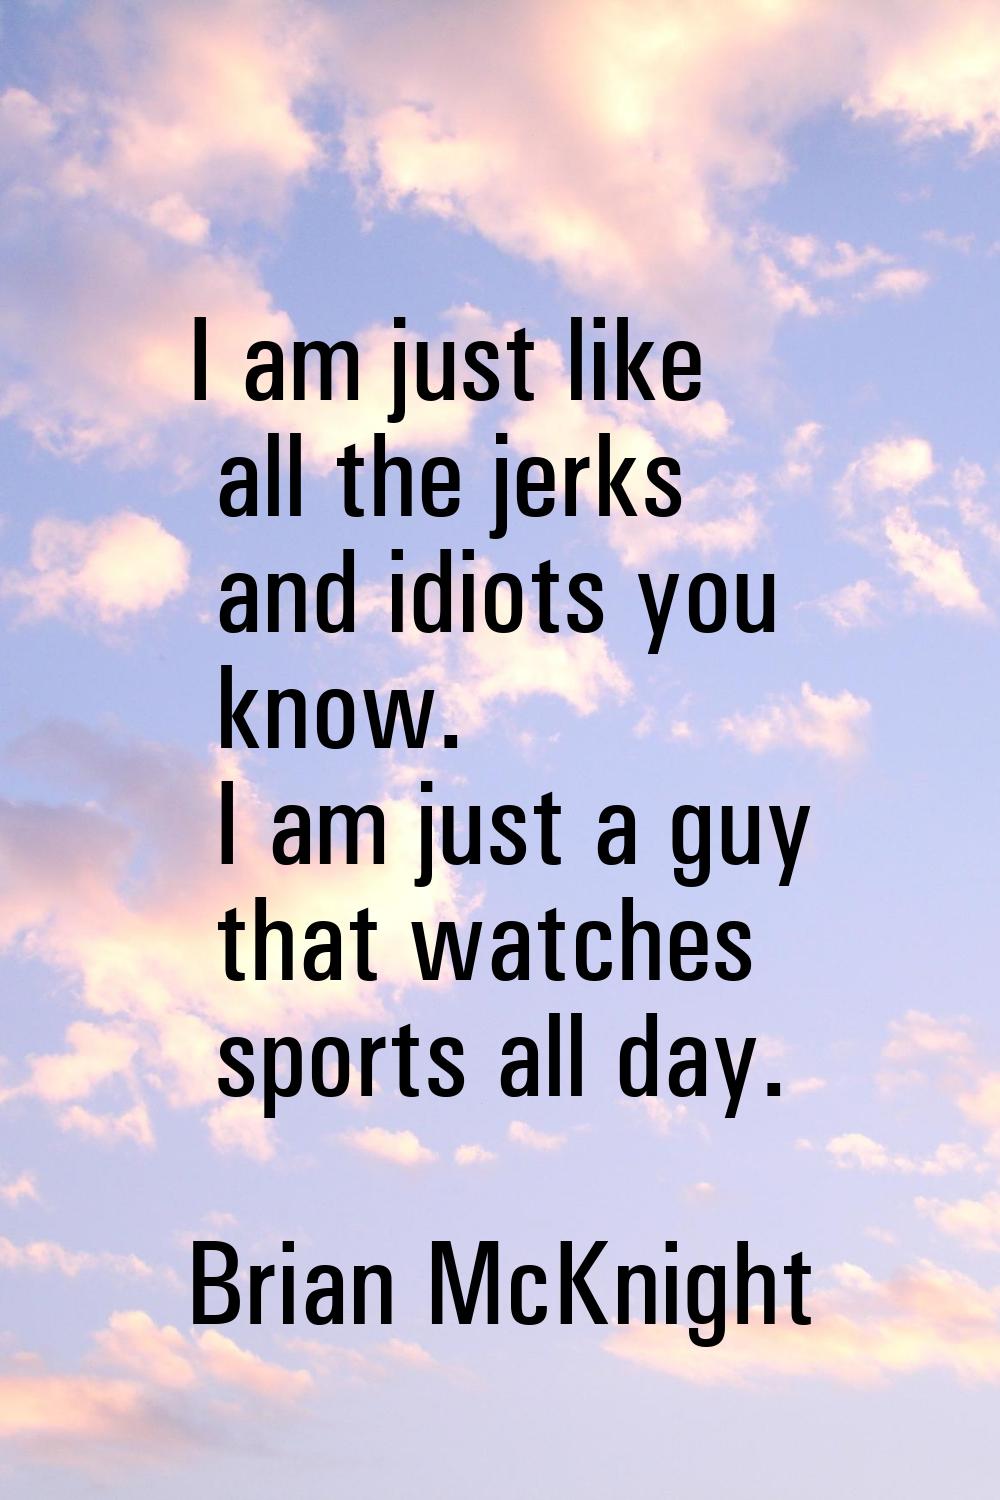 I am just like all the jerks and idiots you know. I am just a guy that watches sports all day.